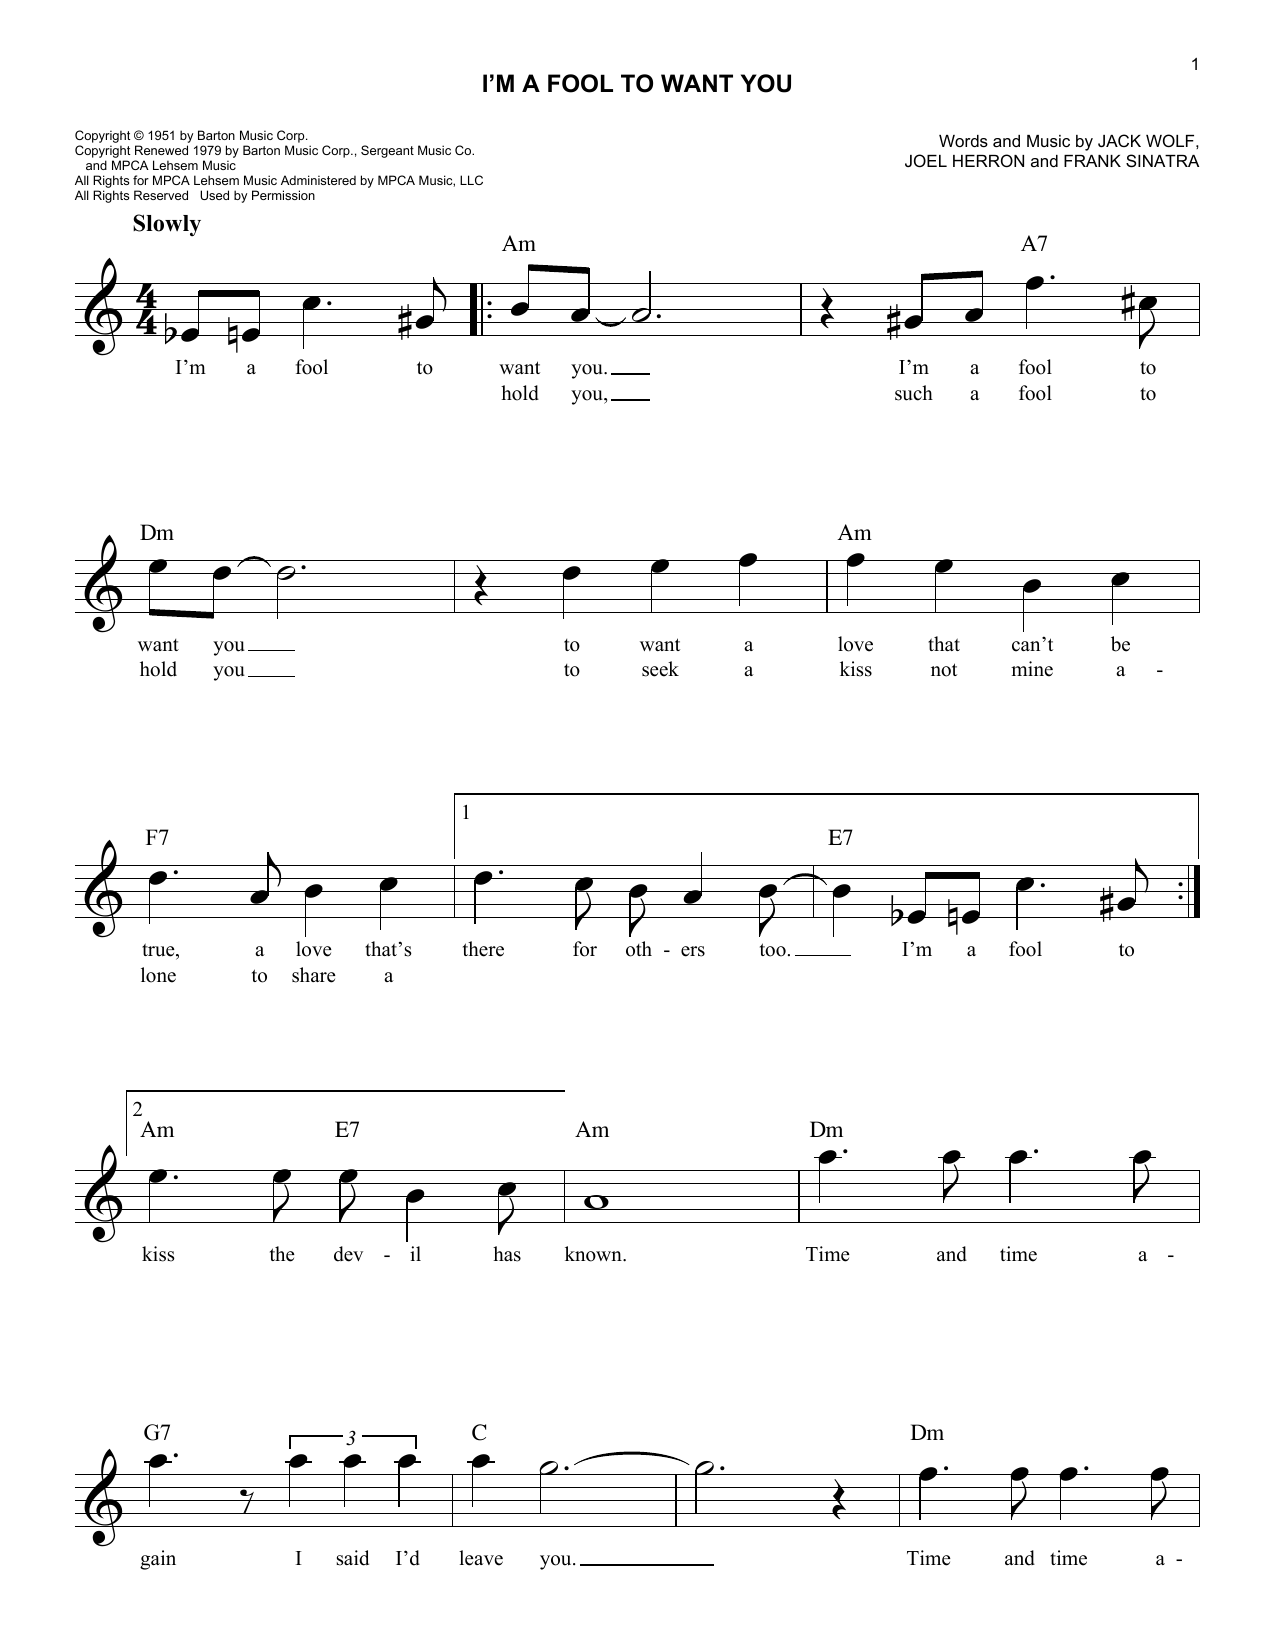 Chet Baker I'm A Fool To Want You sheet music notes and chords. Download Printable PDF.